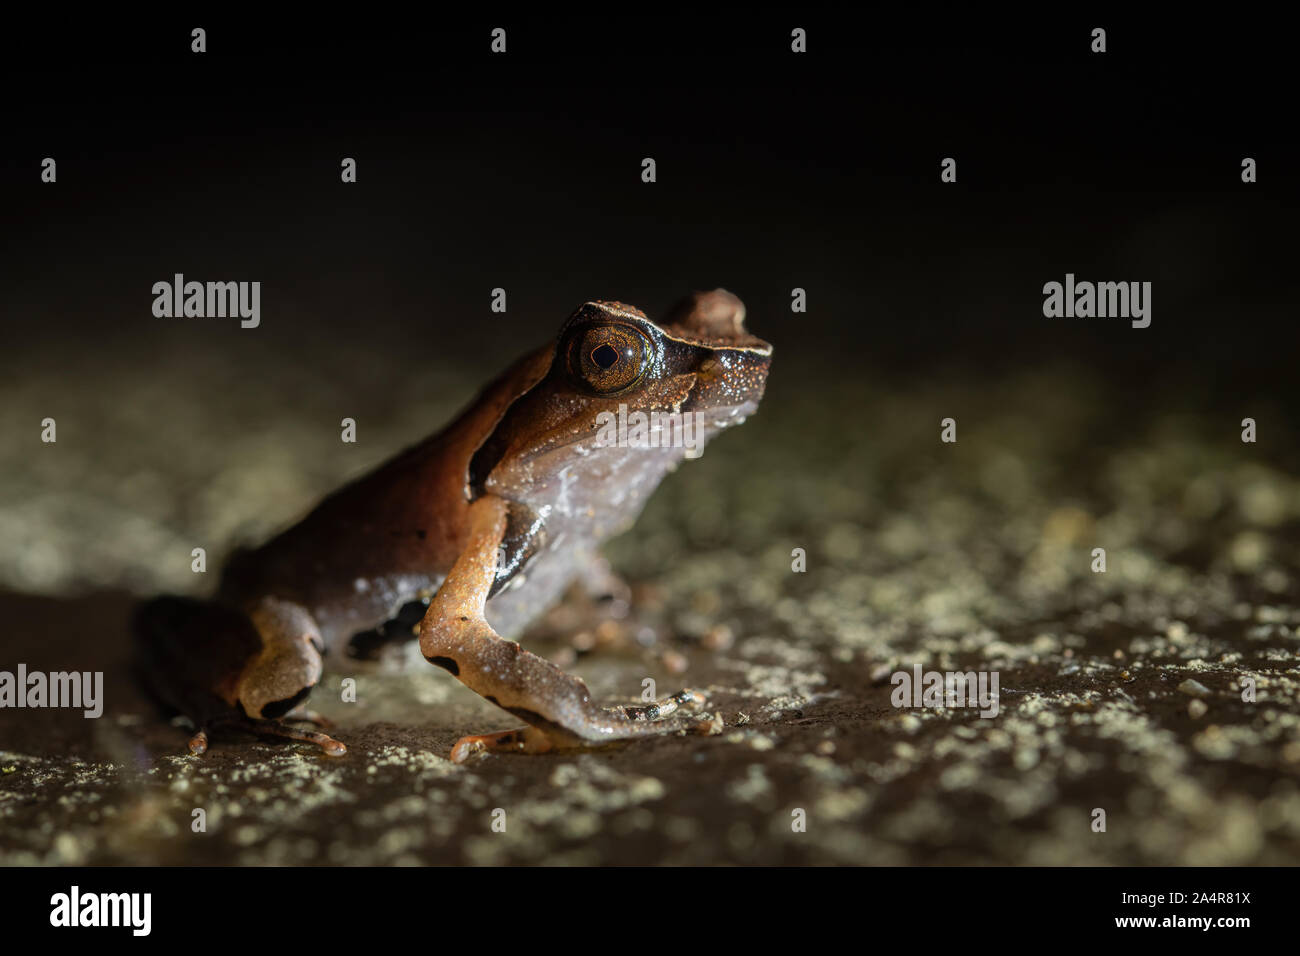 Megophrys major is a species of toad found in Thailand. Stock Photo